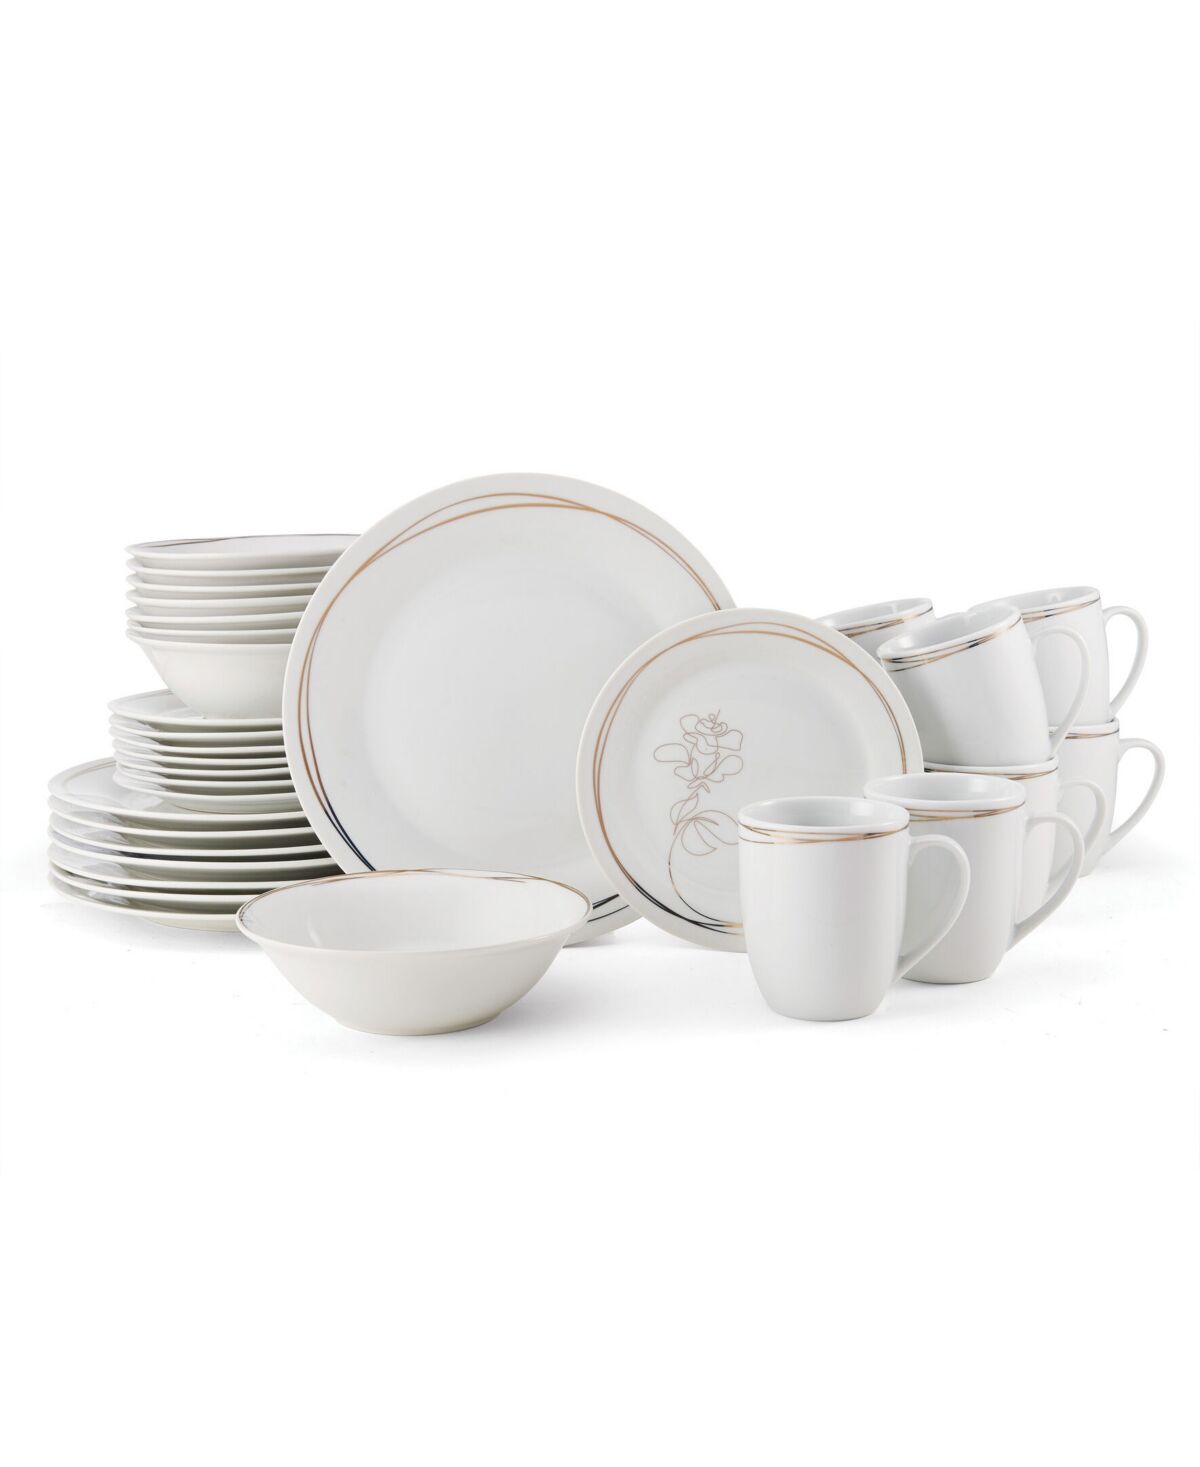 Fitz and Floyd Love Blooms 32 Piece Dinnerware Set, Service for 8 - Multi Color